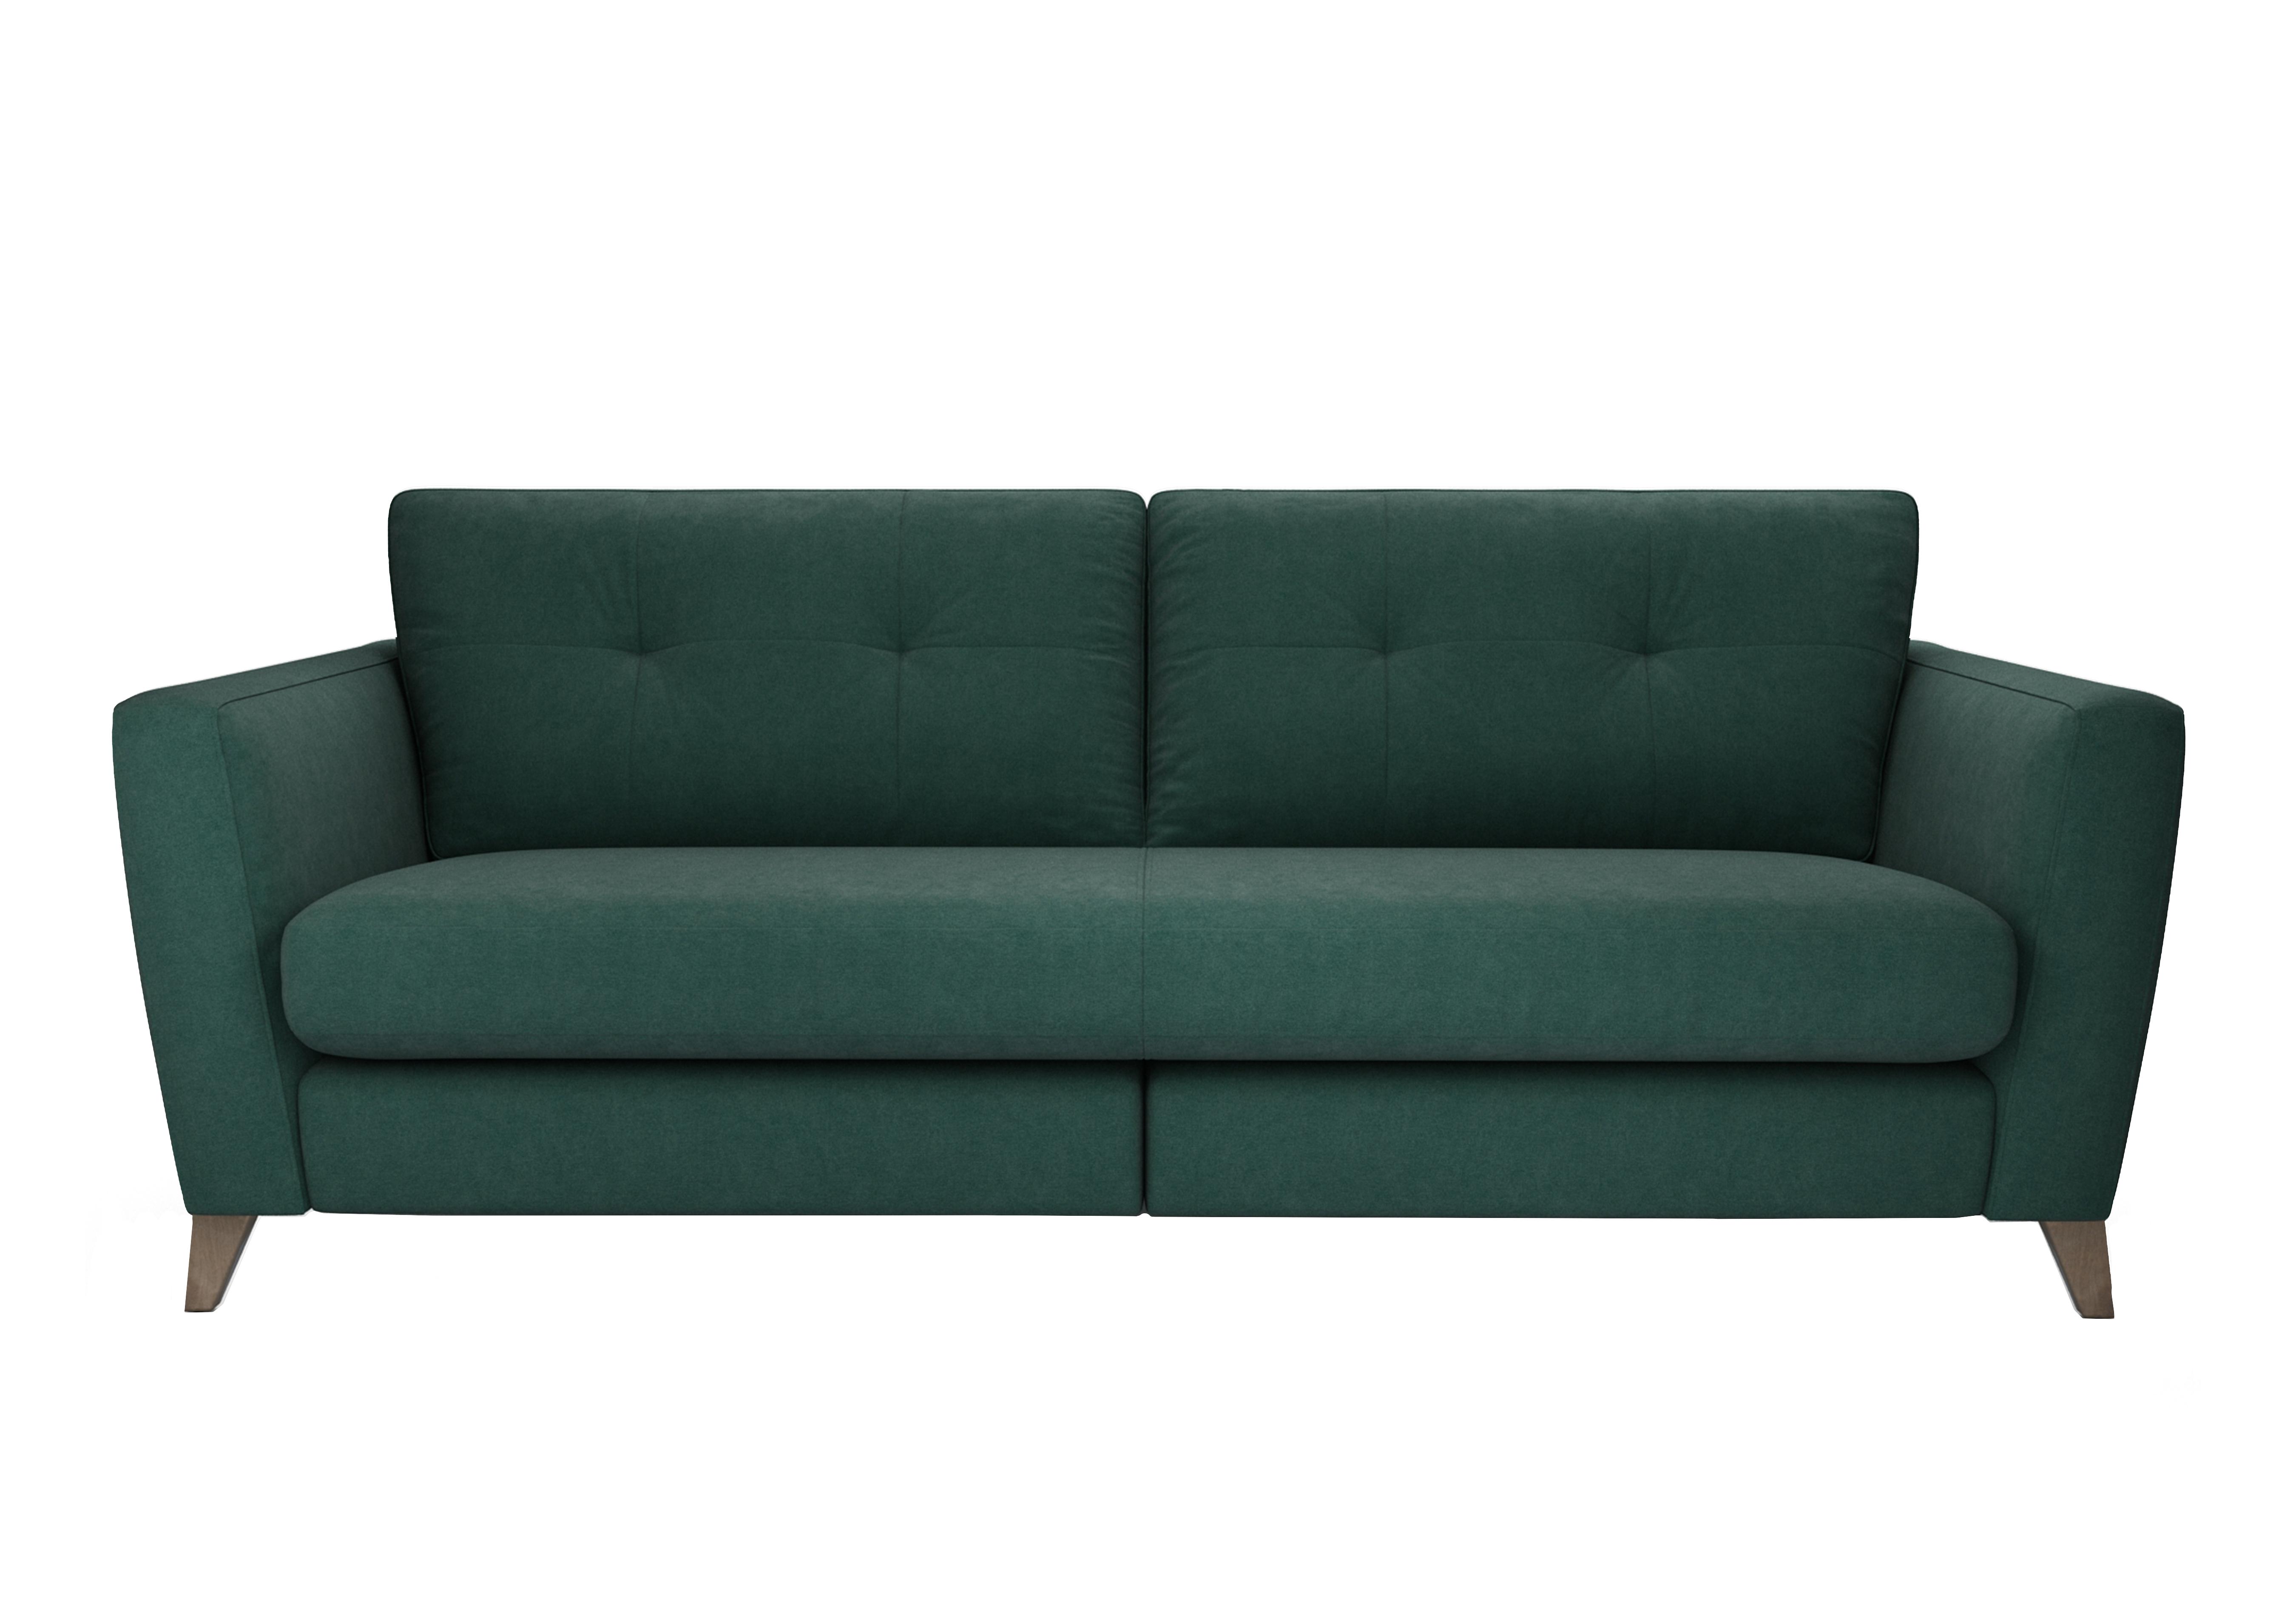 Hermione 4 Seater Fabric Sofa in Cur226 Curly Kale Wo Ft on Furniture Village